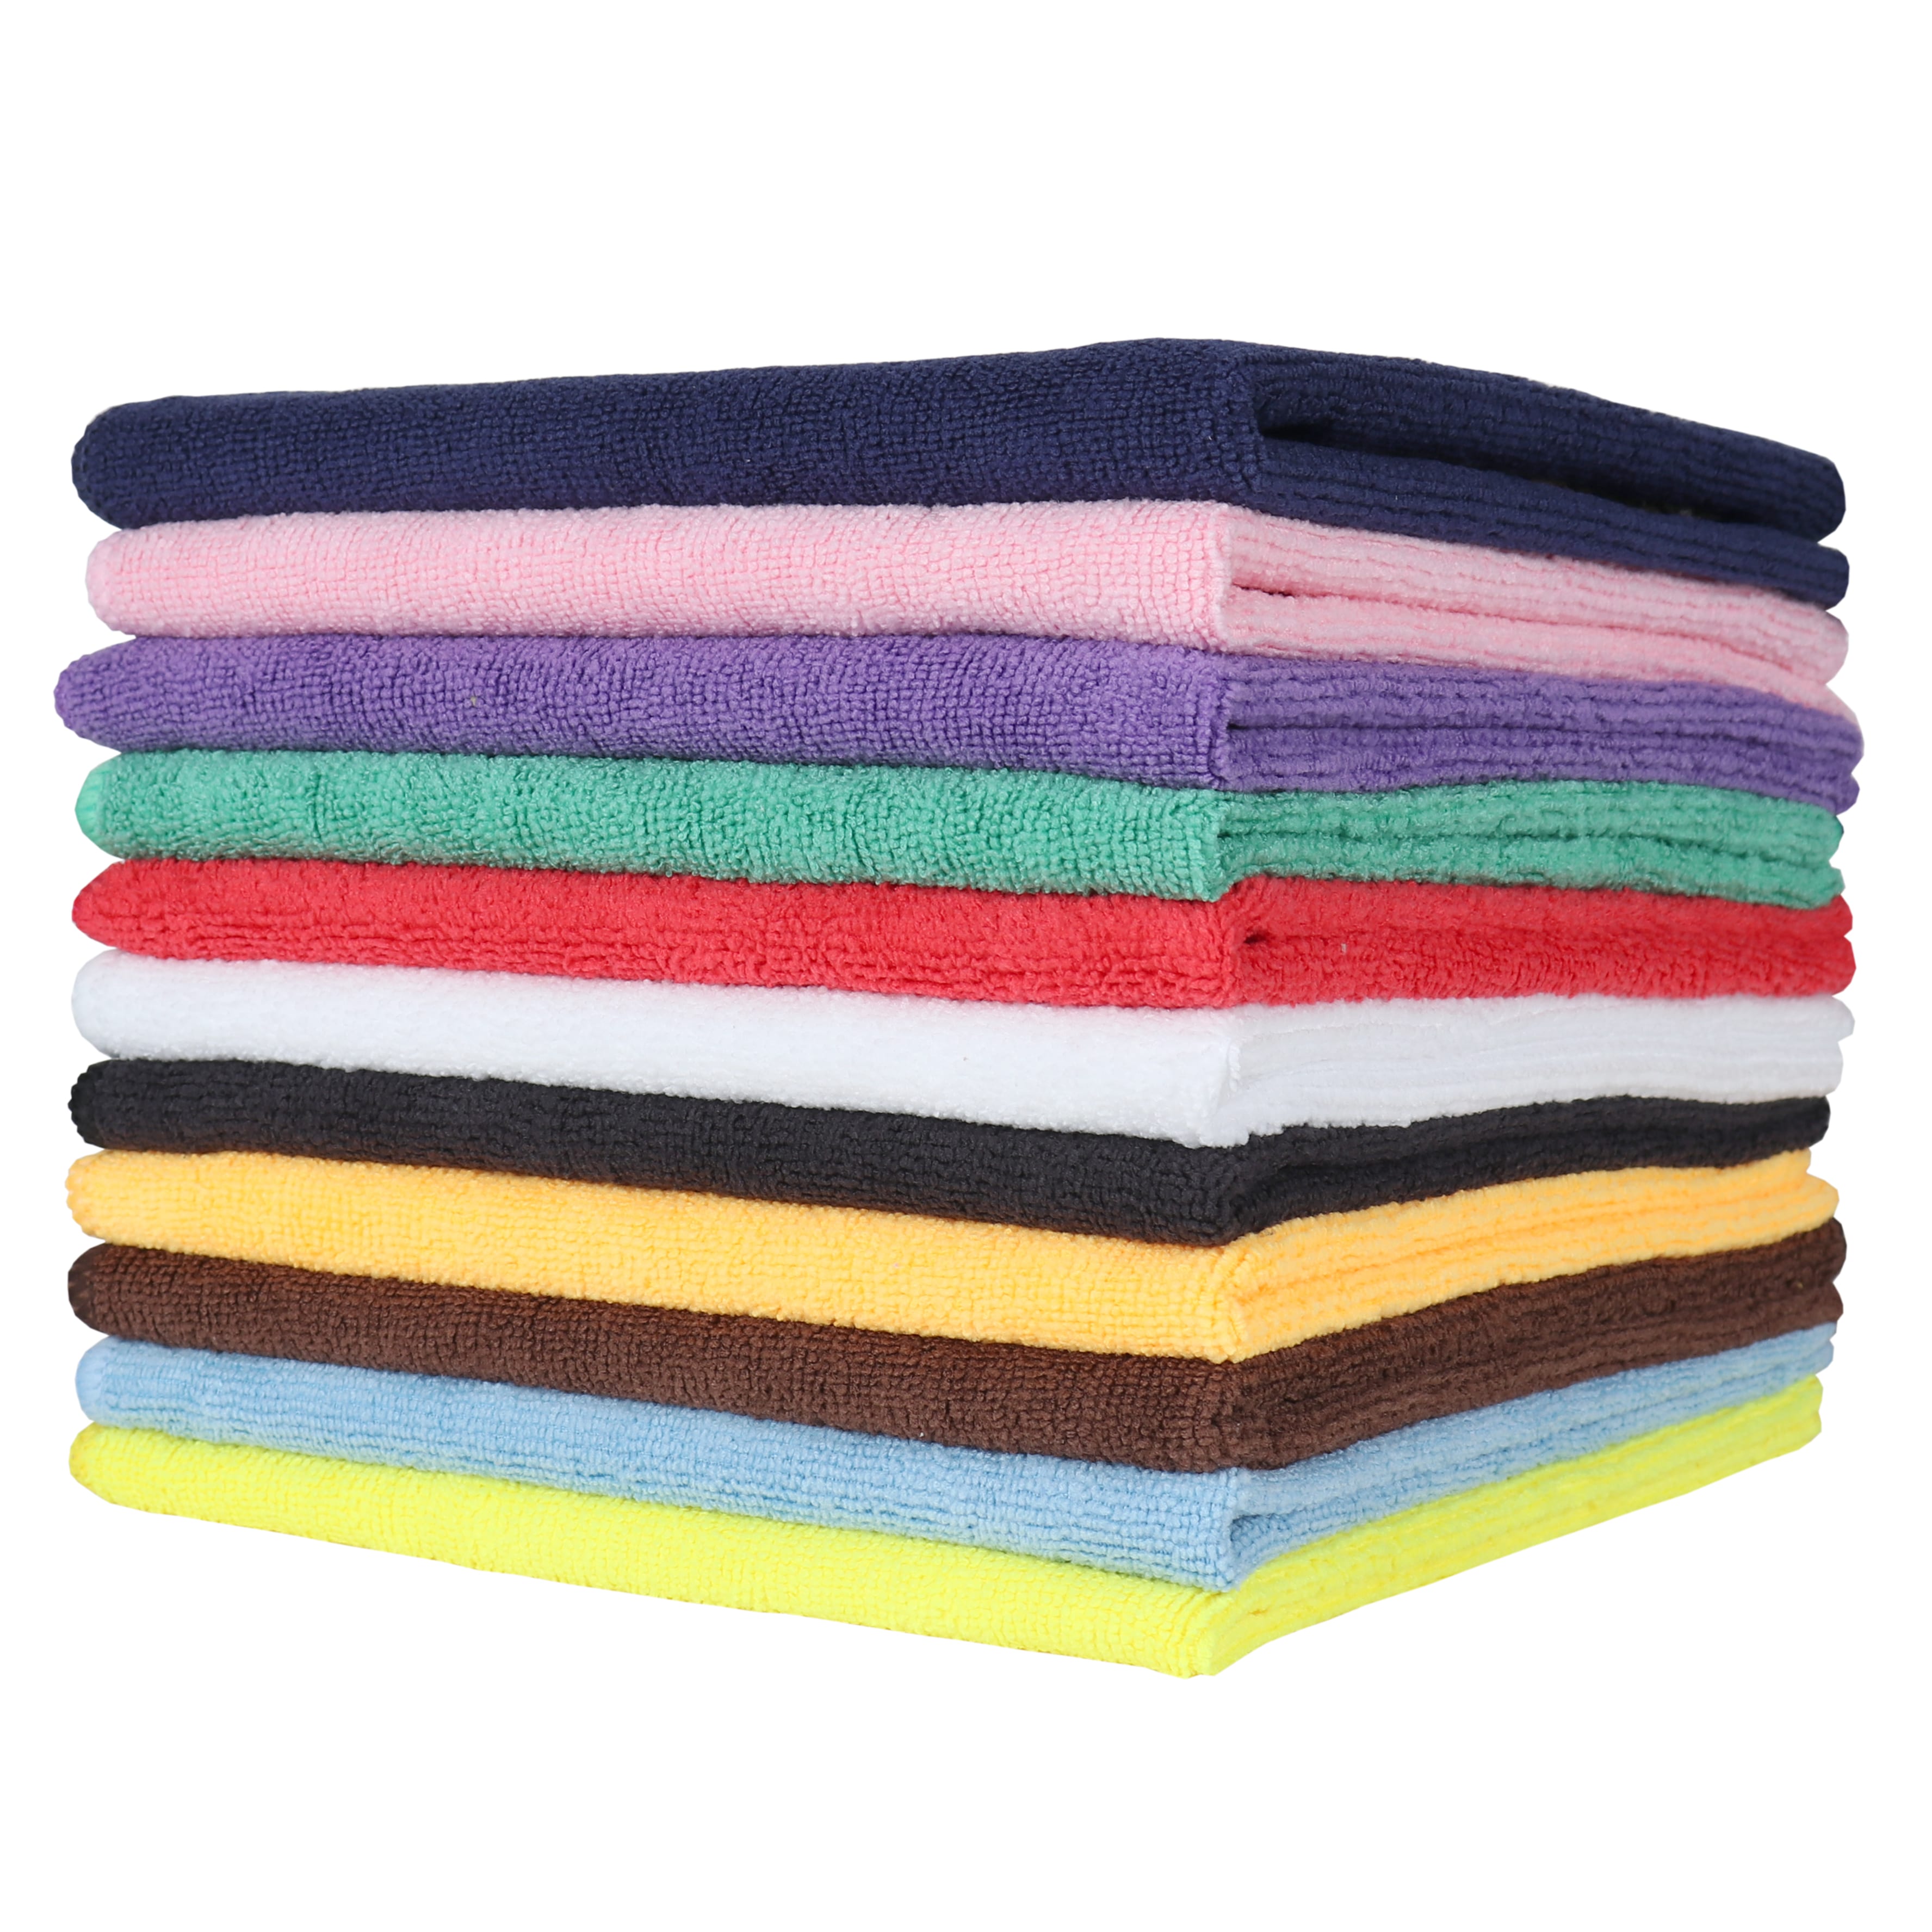 Household Supplies & Cleaning 180 COTTON TERRY CLOTH CLEANING TOWELS ...